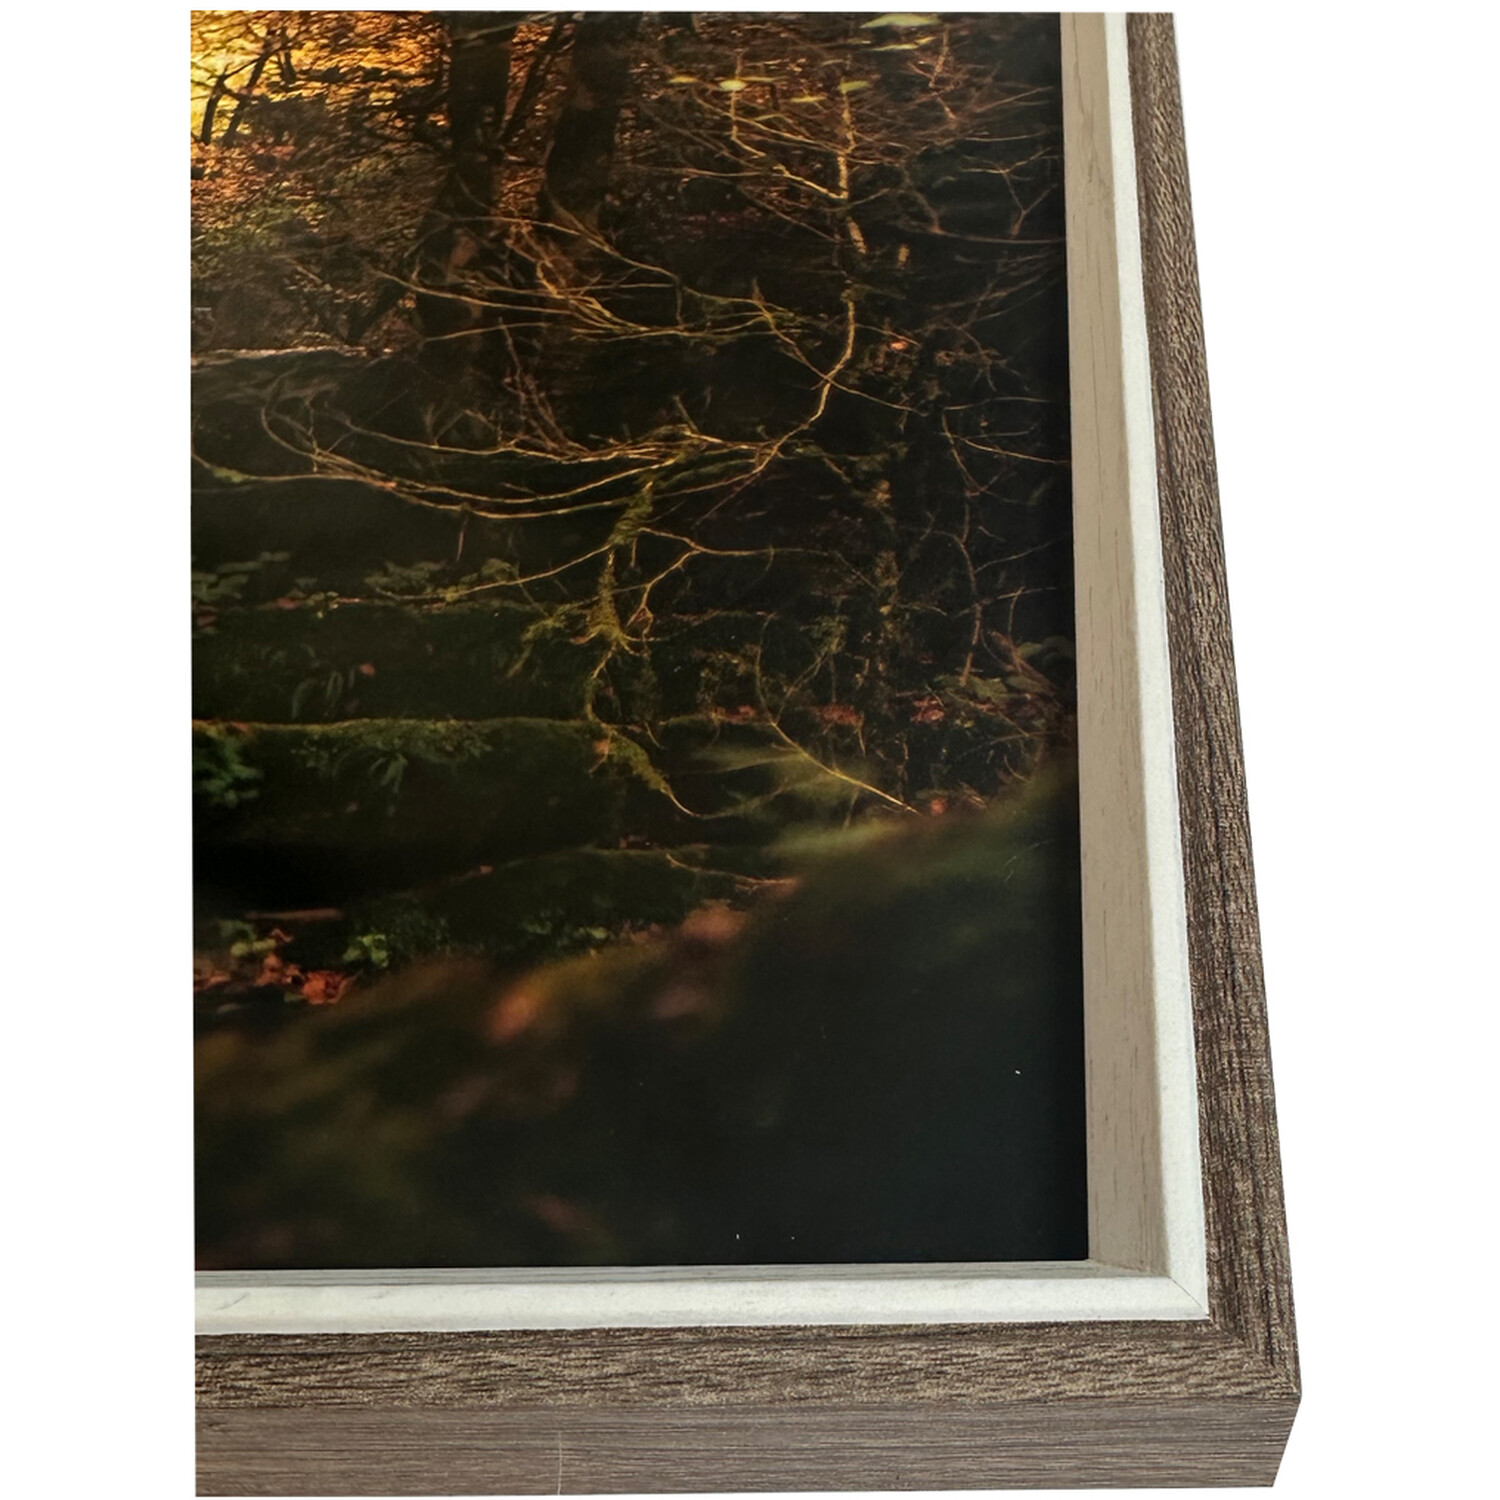 Zoey Rustic Wood Effect Frame - Brown / 10x8in Image 3